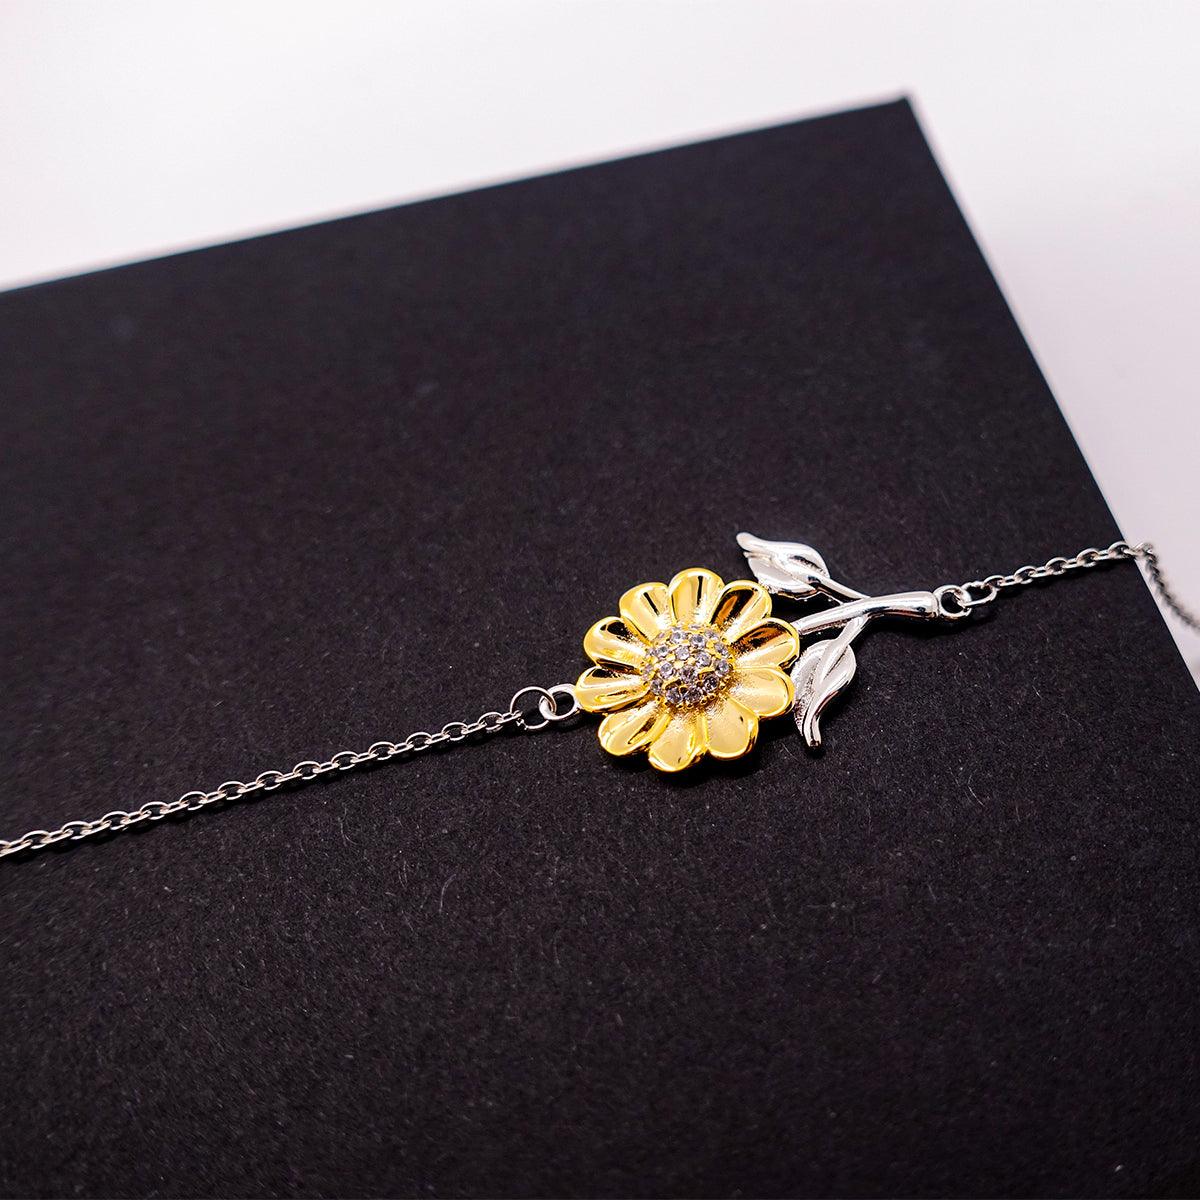 Receptionist Sunflower Bracelet - Thanks for being who you are - Birthday Christmas Jewelry Gifts Coworkers Colleague Boss - Mallard Moon Gift Shop